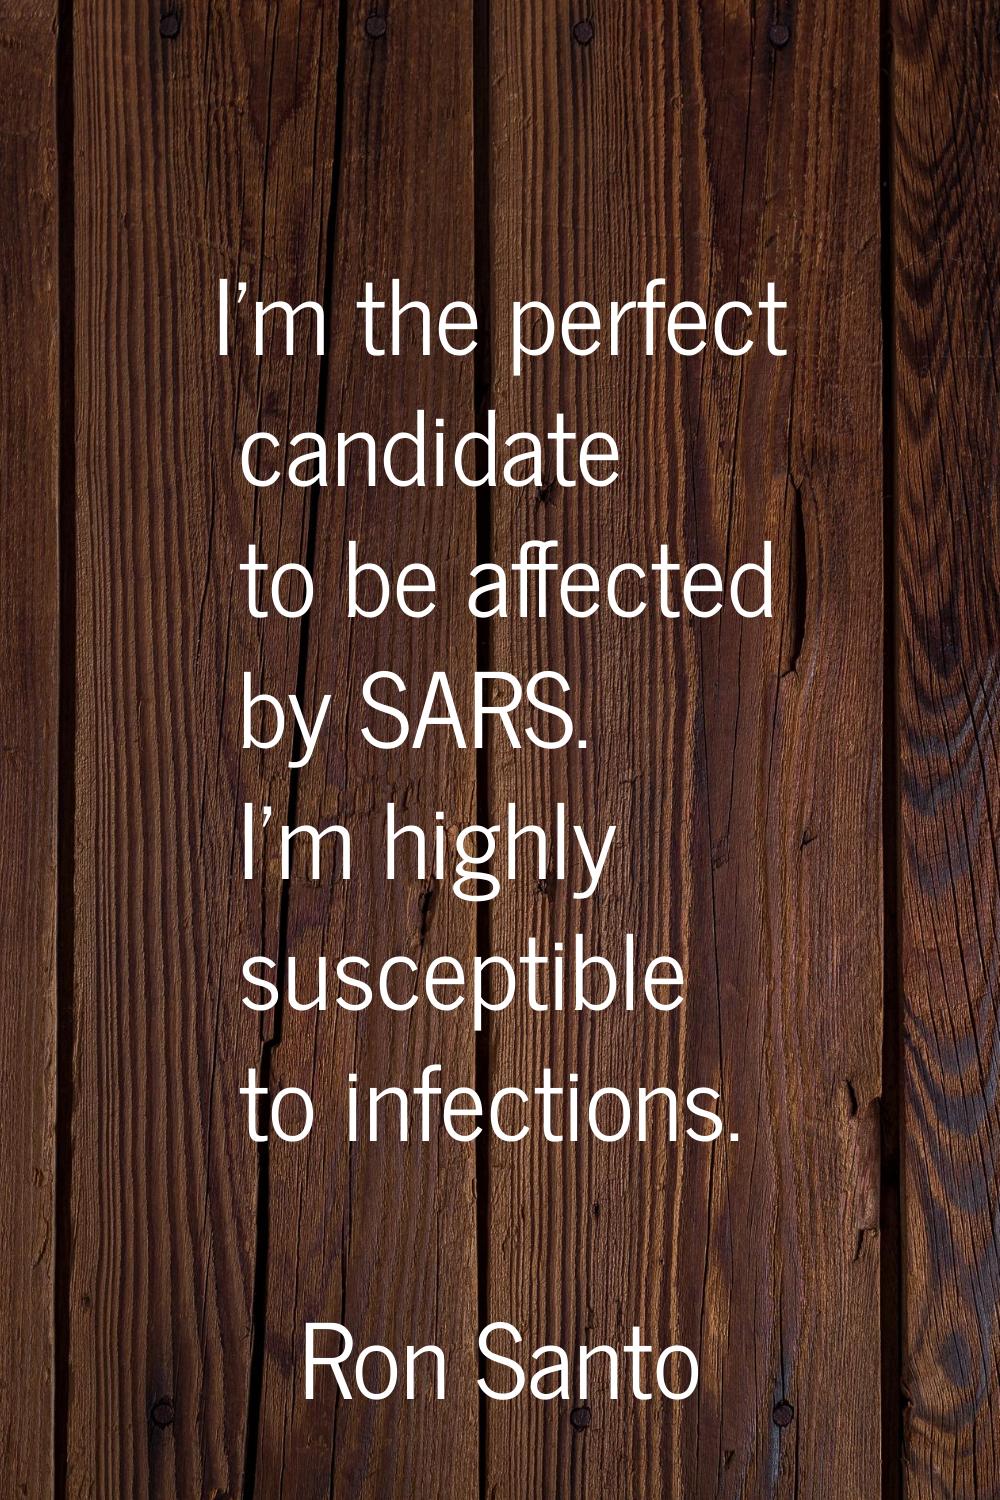 I'm the perfect candidate to be affected by SARS. I'm highly susceptible to infections.